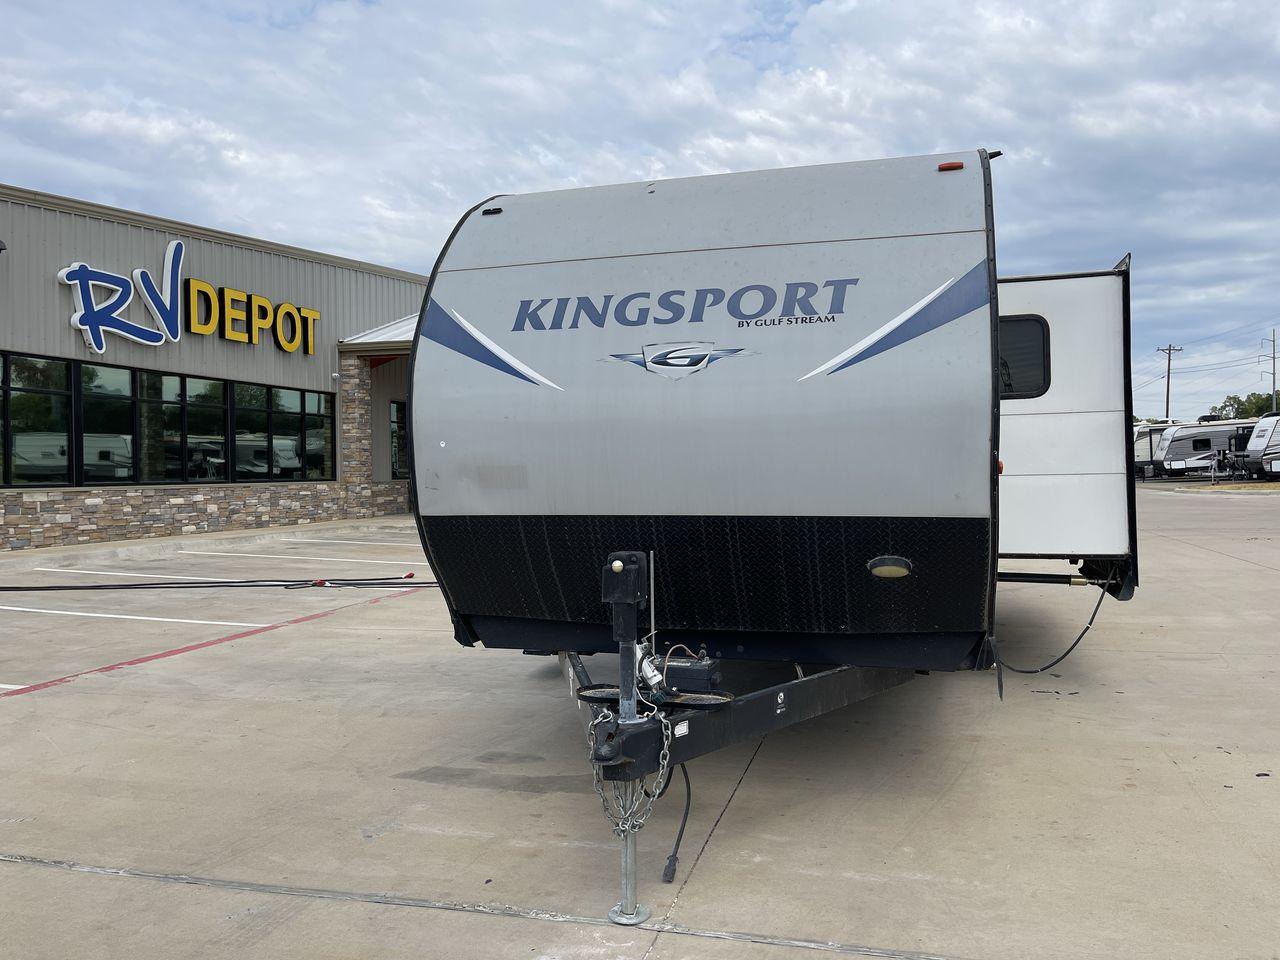 2018 GRAY KINGSPORT 301TB (1NL1GTS2XJ1) , Length: 33.58 ft. | Dry Weight: 6,845 lbs. | Slides: 1 transmission, located at 4319 N Main St, Cleburne, TX, 76033, (817) 678-5133, 32.385960, -97.391212 - The 2018 Kingsport 301TB travel trailer will help you prepare for your next vacation. This well-thought-out, kid-friendly RV is your ticket to enjoyable and unique camping trips. The dimensions of this unit are 34.08 ft in length, 8 ft in width, and 10.75 ft in height. It has a dry weight of 6,845 l - Photo #0